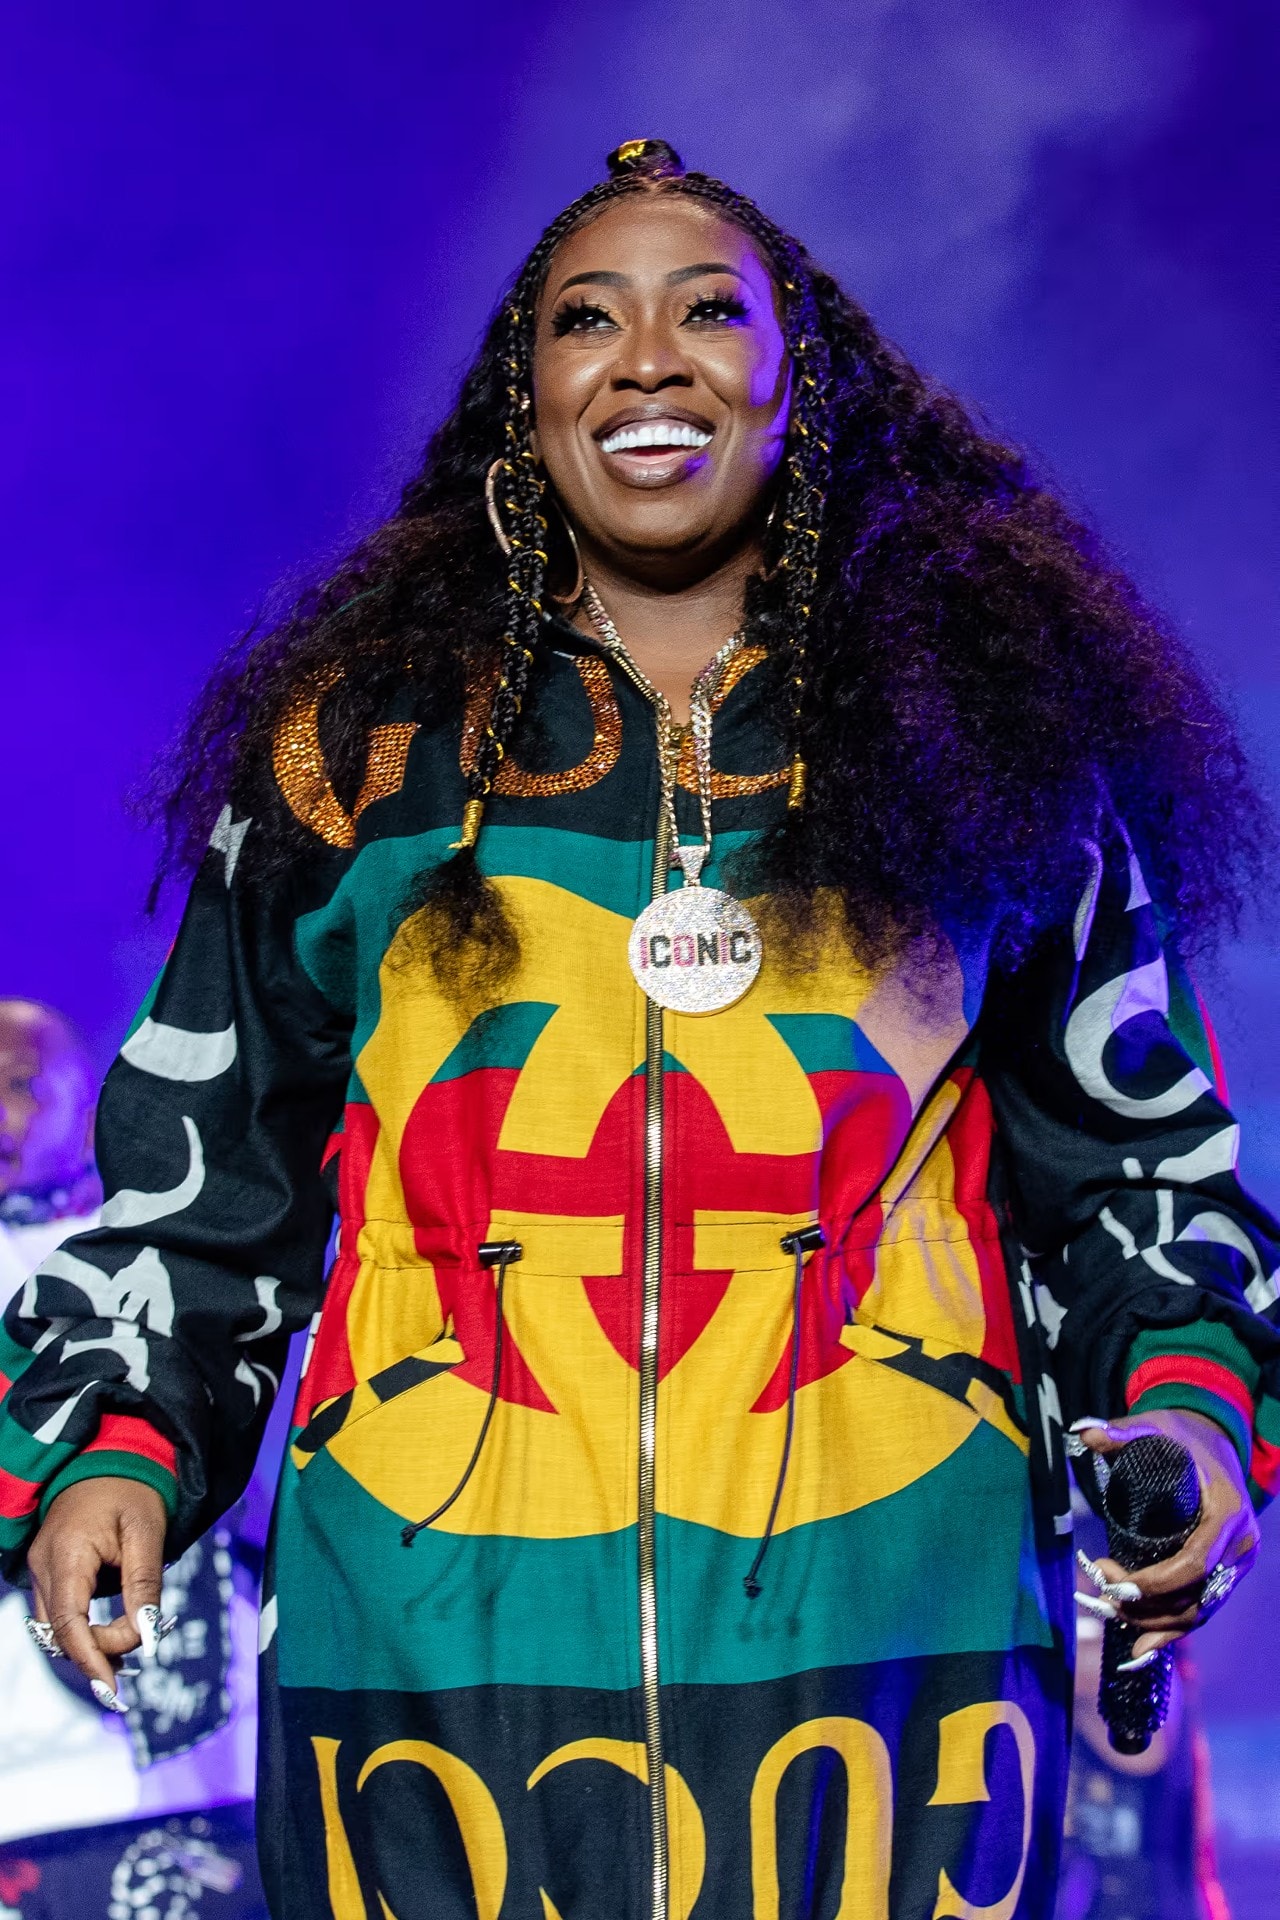 missy elliott rock & roll hall of fame inducted music info make history first female rapper